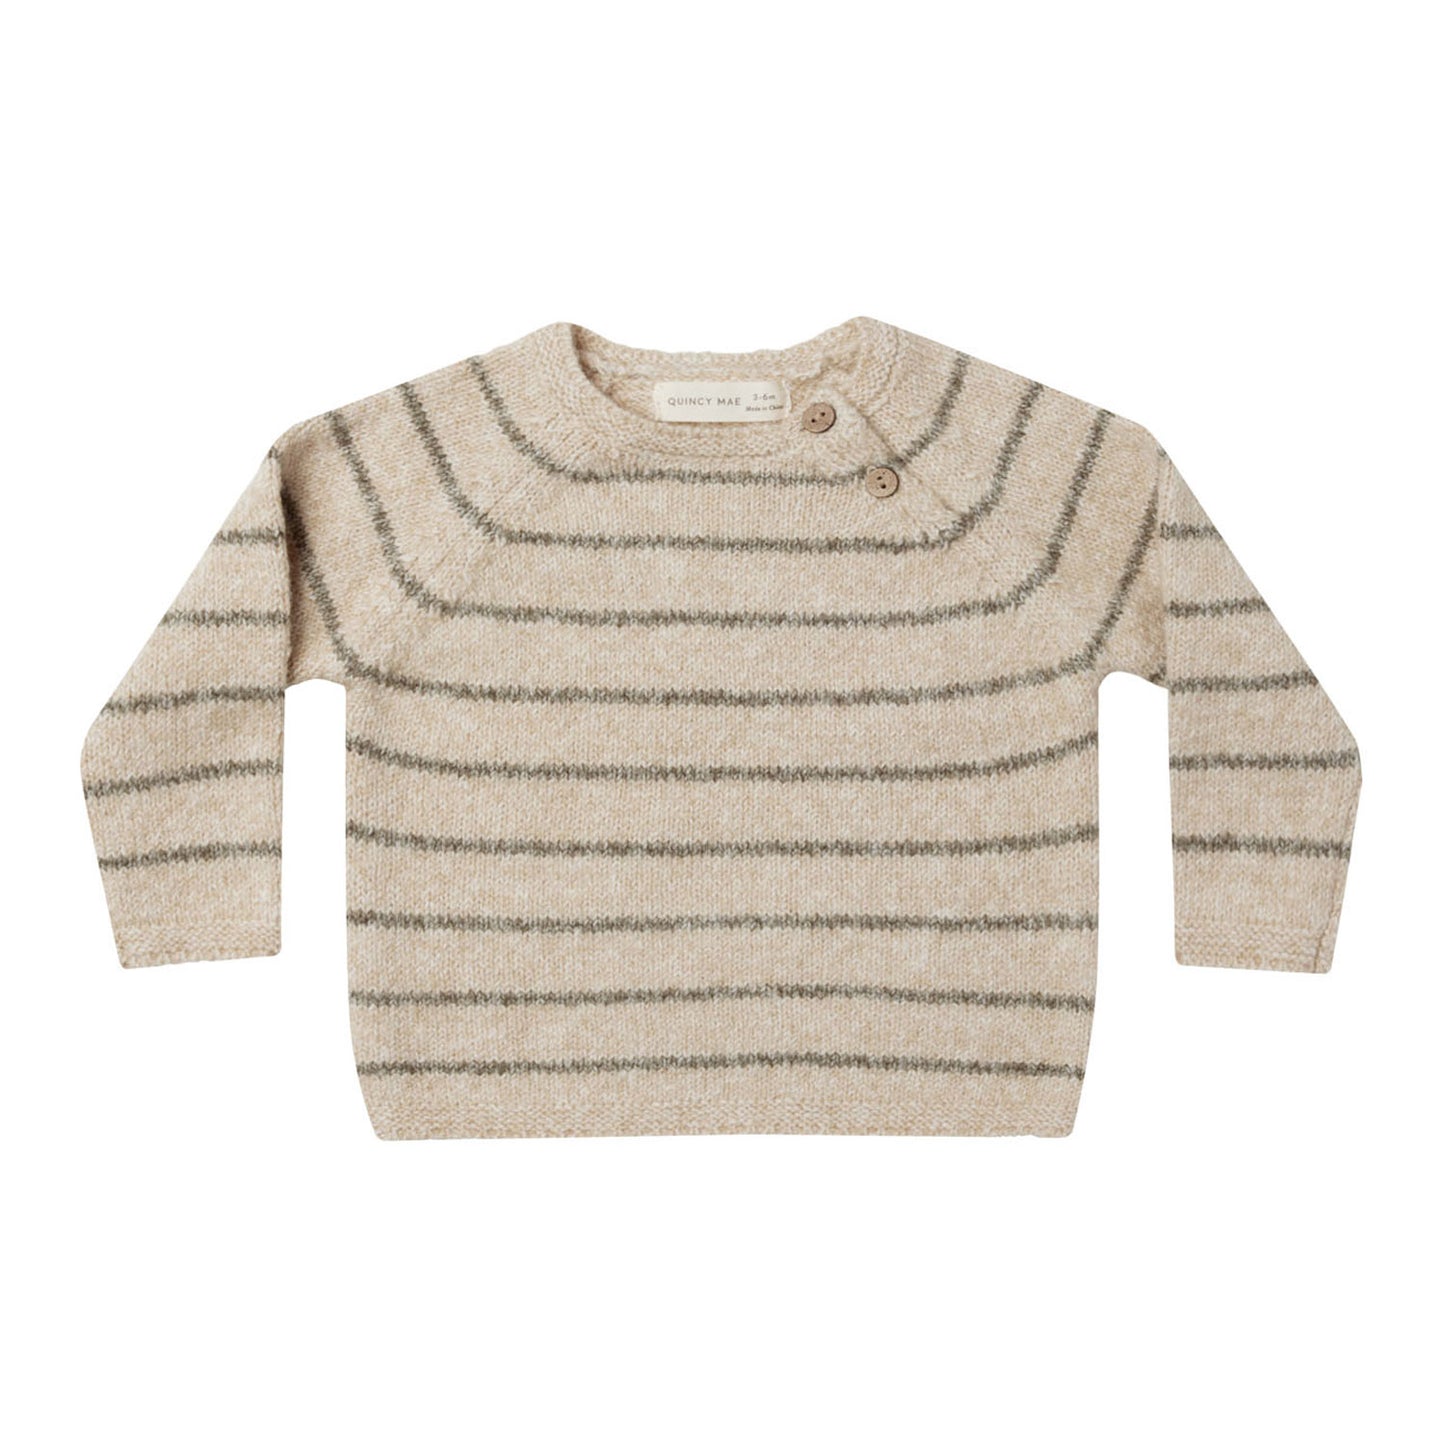 Quincy Mae Ace Knit Sweater - Basil Stripe - Sand Heathered